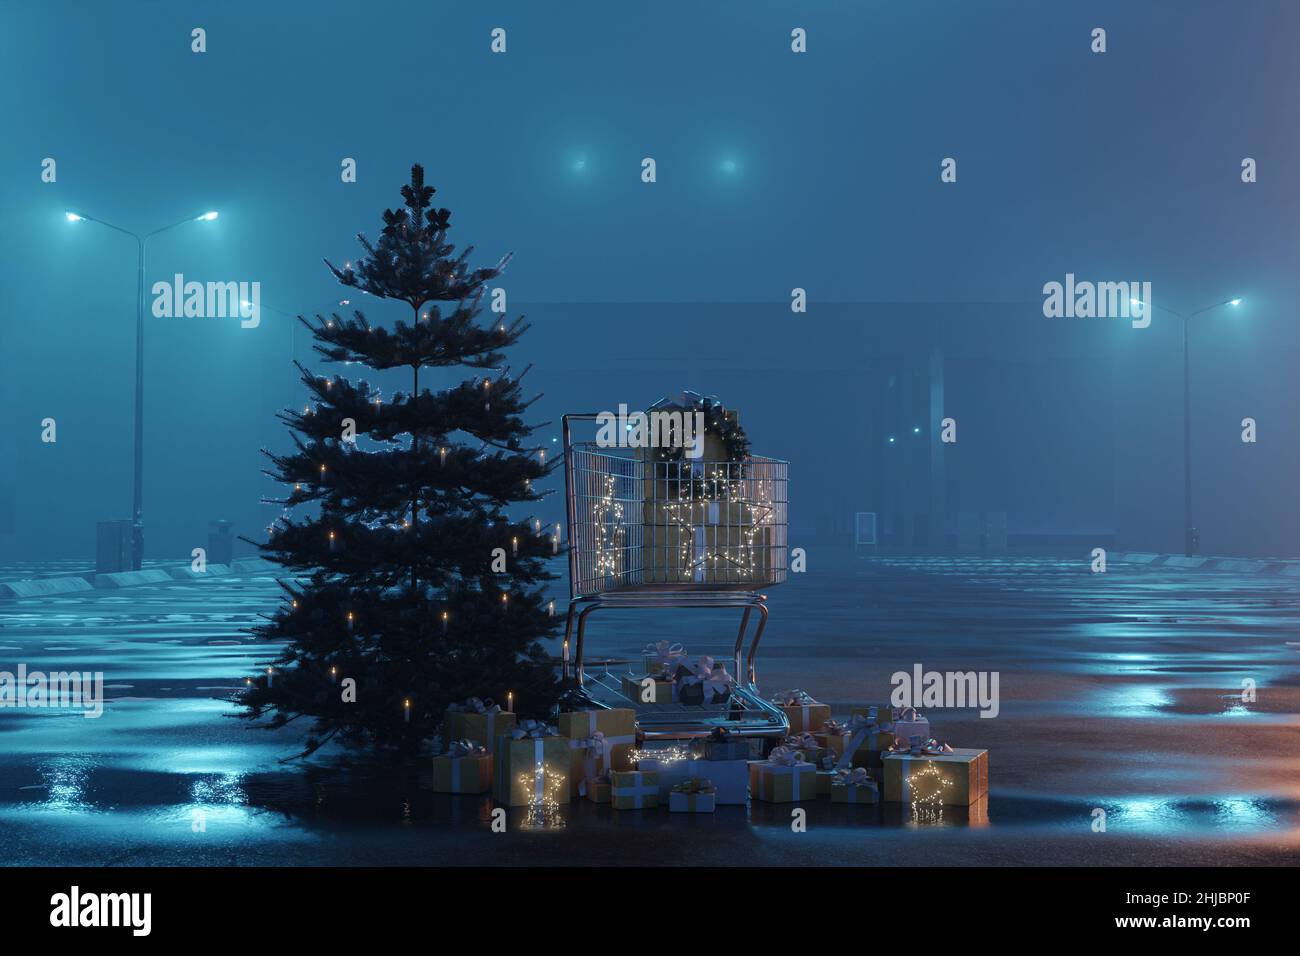 3d rendering of illuminated christmas tree next to shopping trolley at abandoned foggy parking space Stock Photo